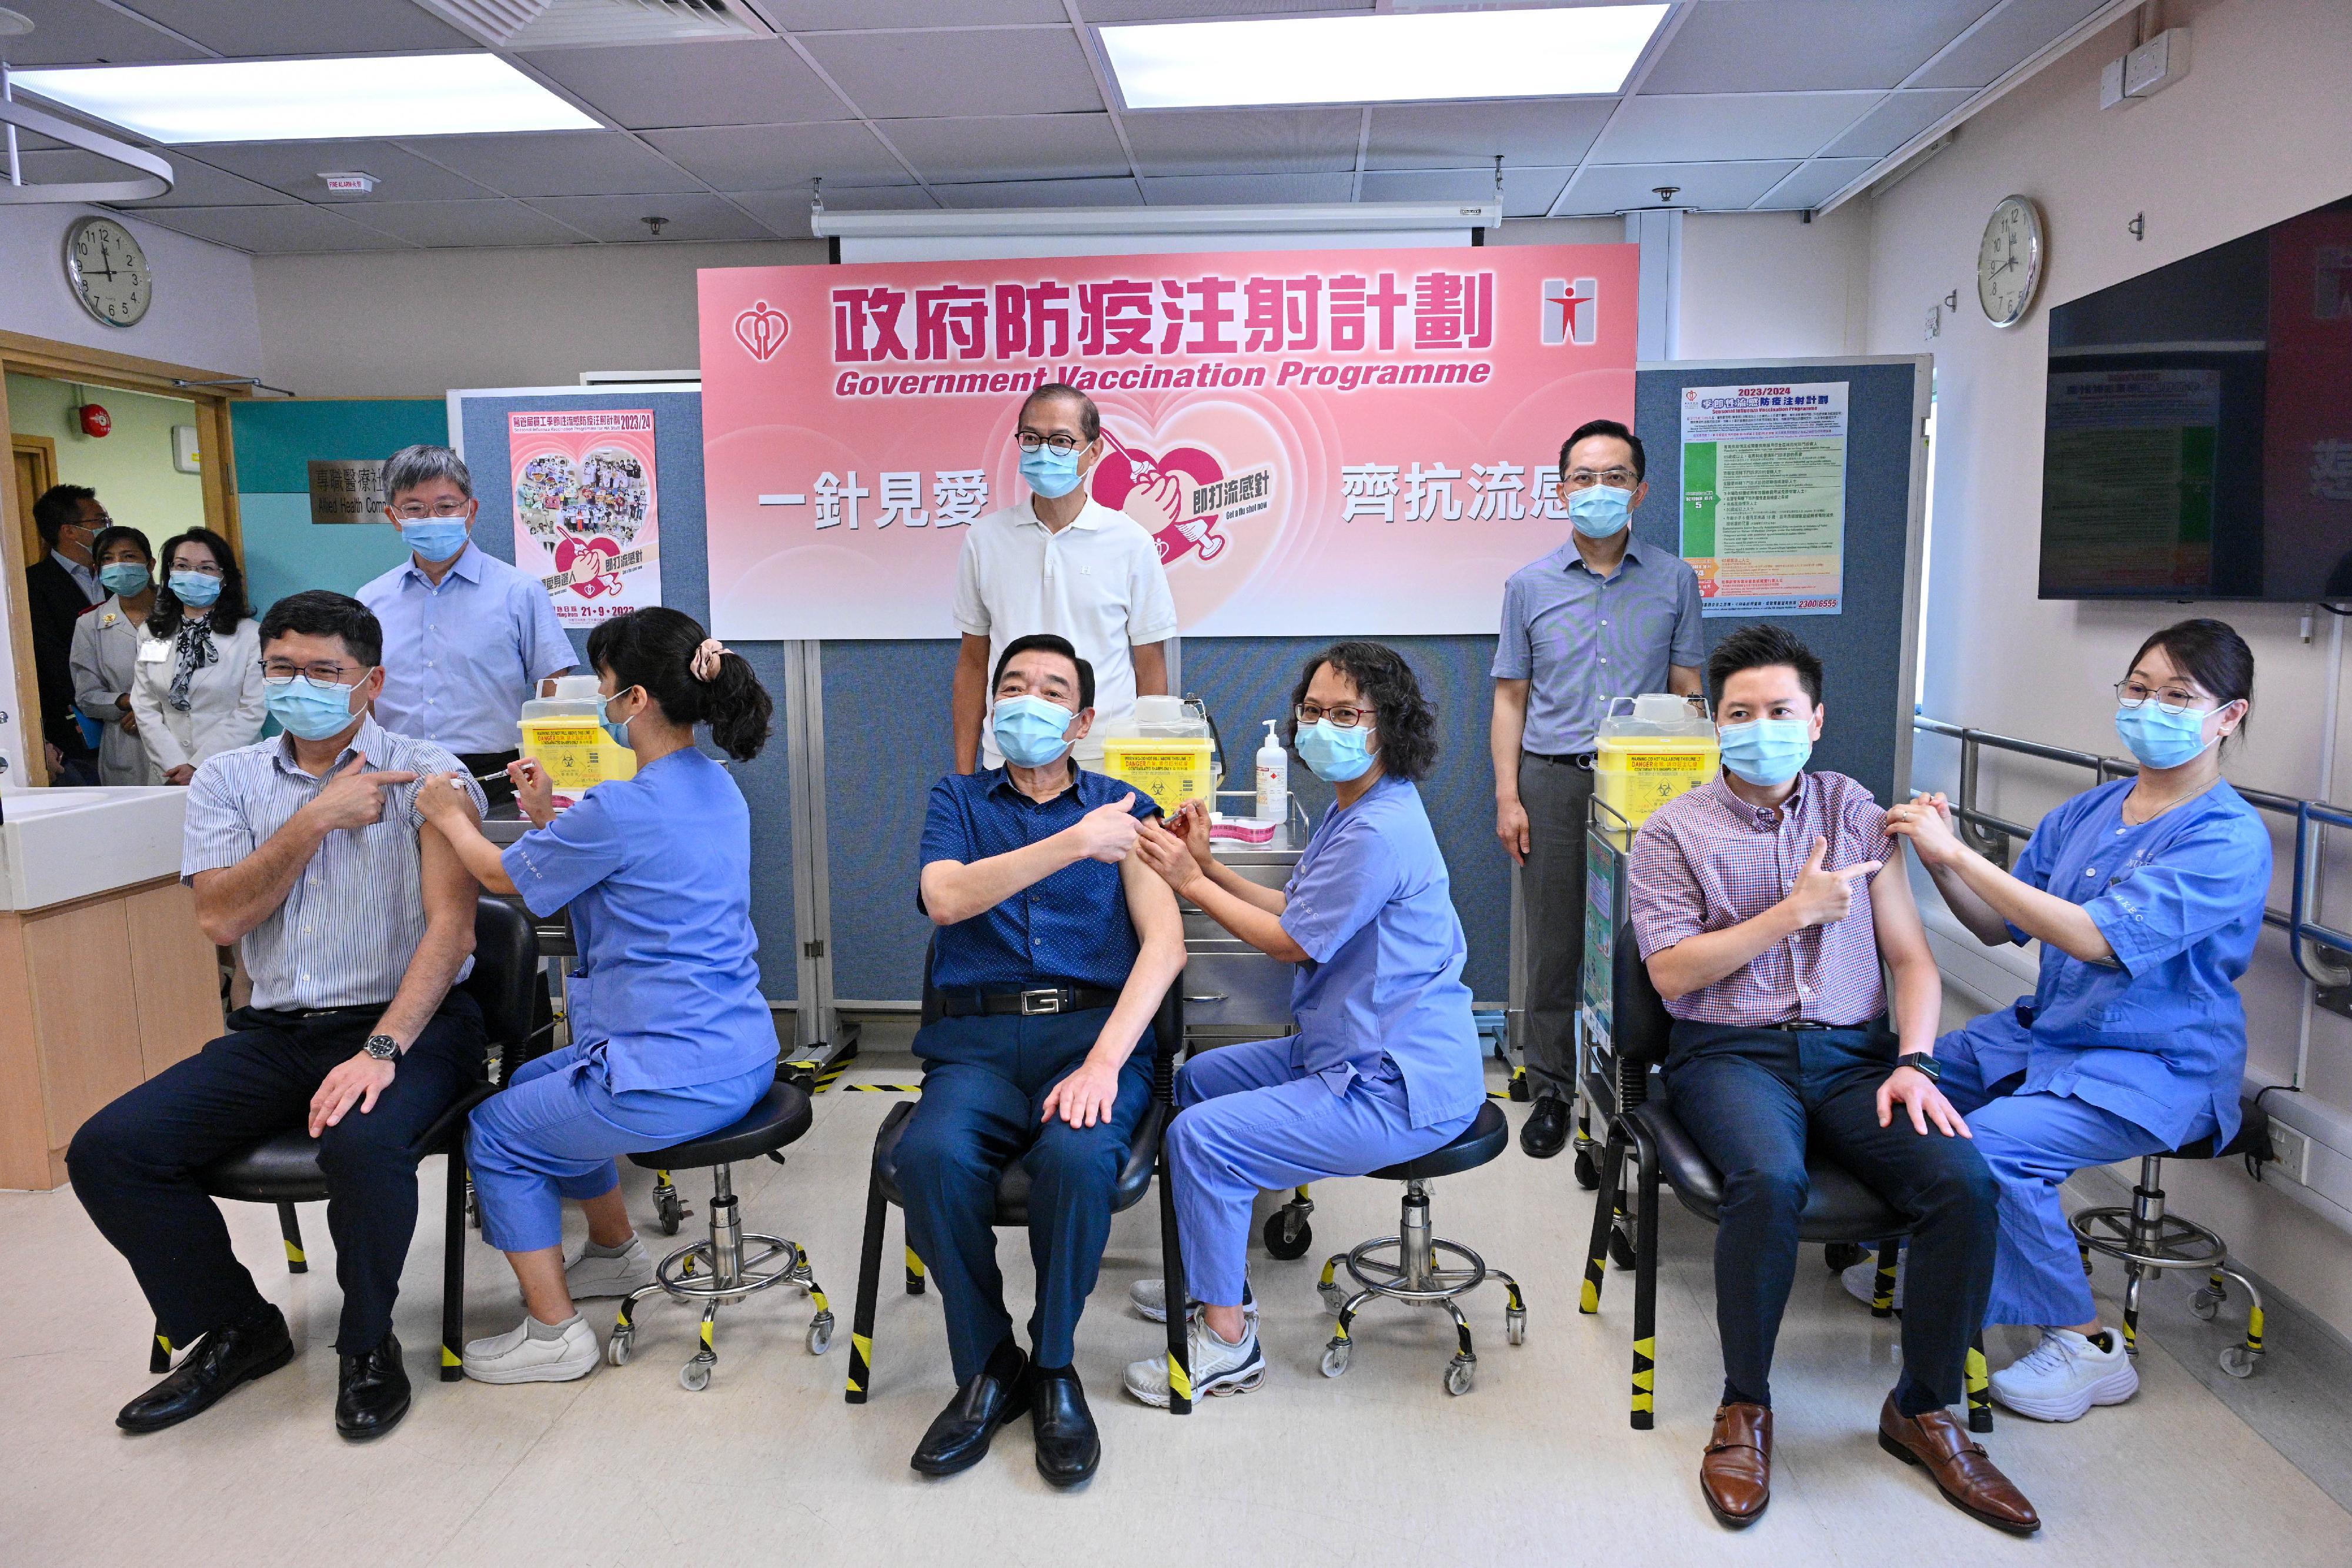 The Controller of the Centre for Health Protection of the Department of Health, Dr Edwin Tsui (front row, second right); the Chairman of the Hospital Authority (HA), Mr Henry Fan (front row, third left); and the Chief Executive of the HA, Dr Tony Ko (front row, first left), receive the seasonal influenza vaccination at the Sai Wan Ho General Out-patient Clinic today (September 28). Looking on are the Secretary for Health, Professor Lo Chung-mau (back row, centre); the Permanent Secretary for Health, Mr Thomas Chan (back row, left); and the Director of Health, Dr Ronald Lam (back row, right).
